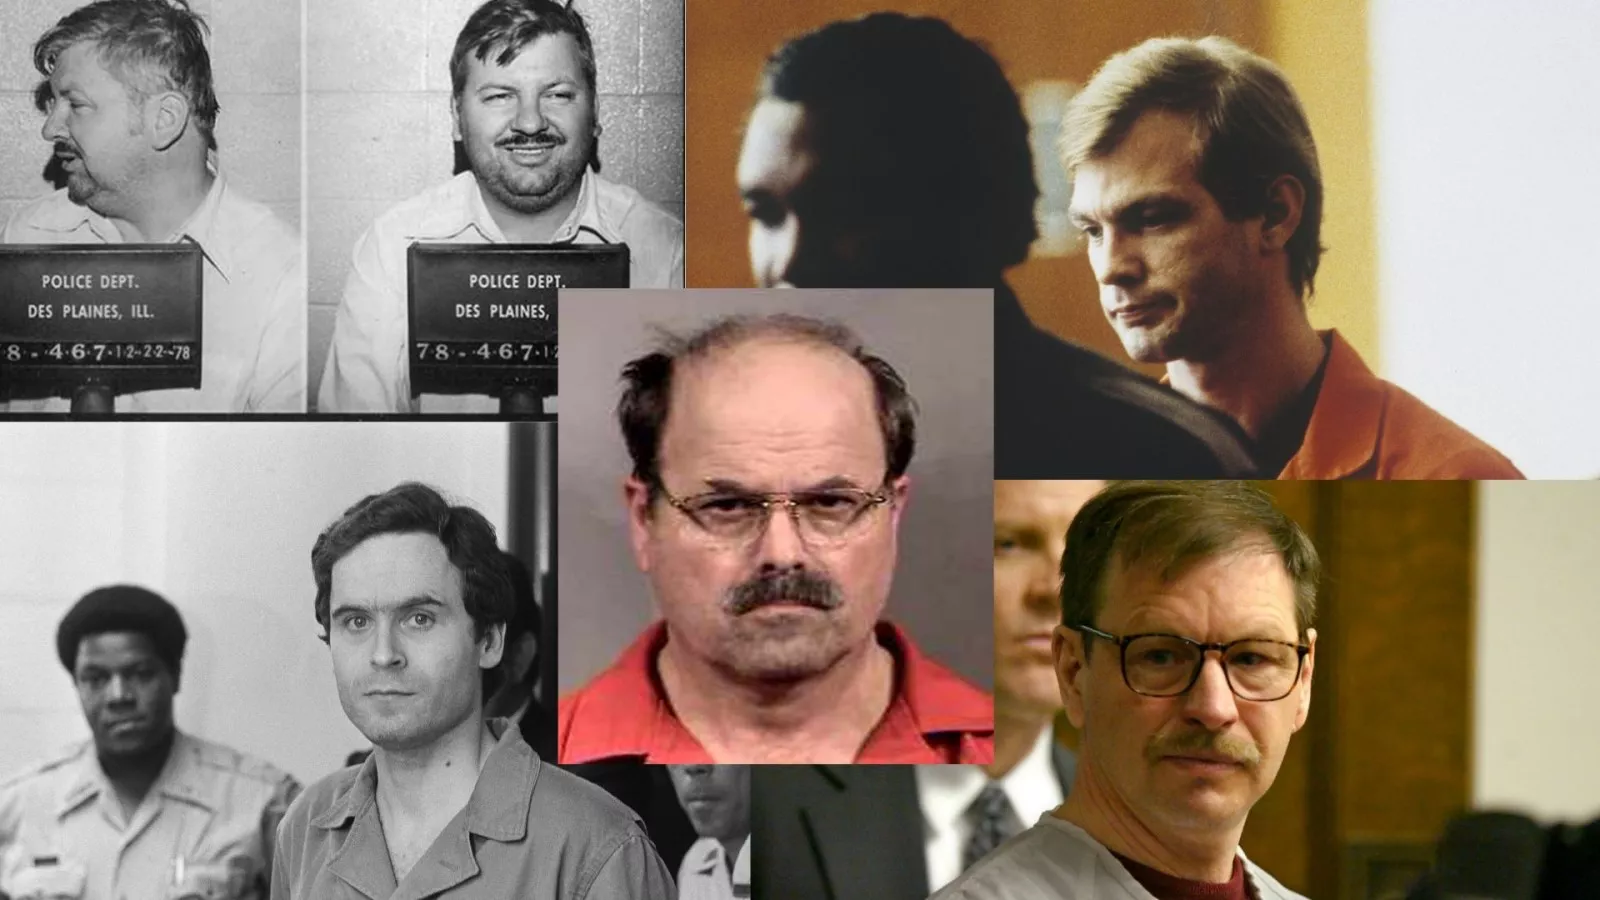 11 Famous Murderers And Serial Killers In Colorado